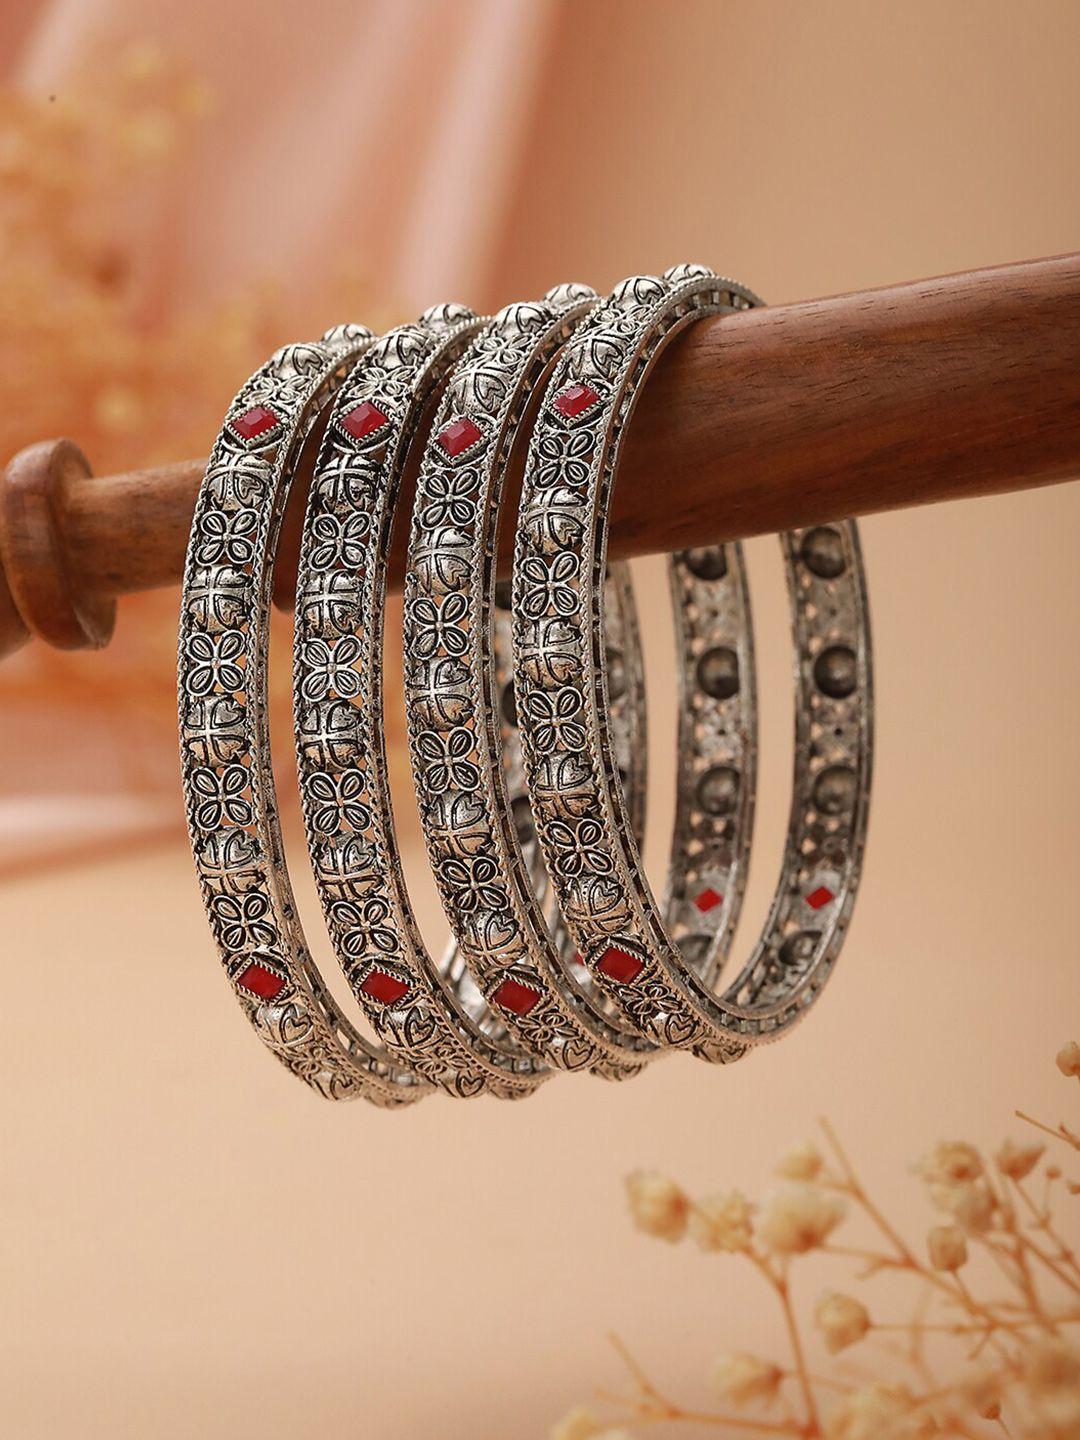 jazz and sizzle set of 4 silver-plated stone-studded oxidized bangles